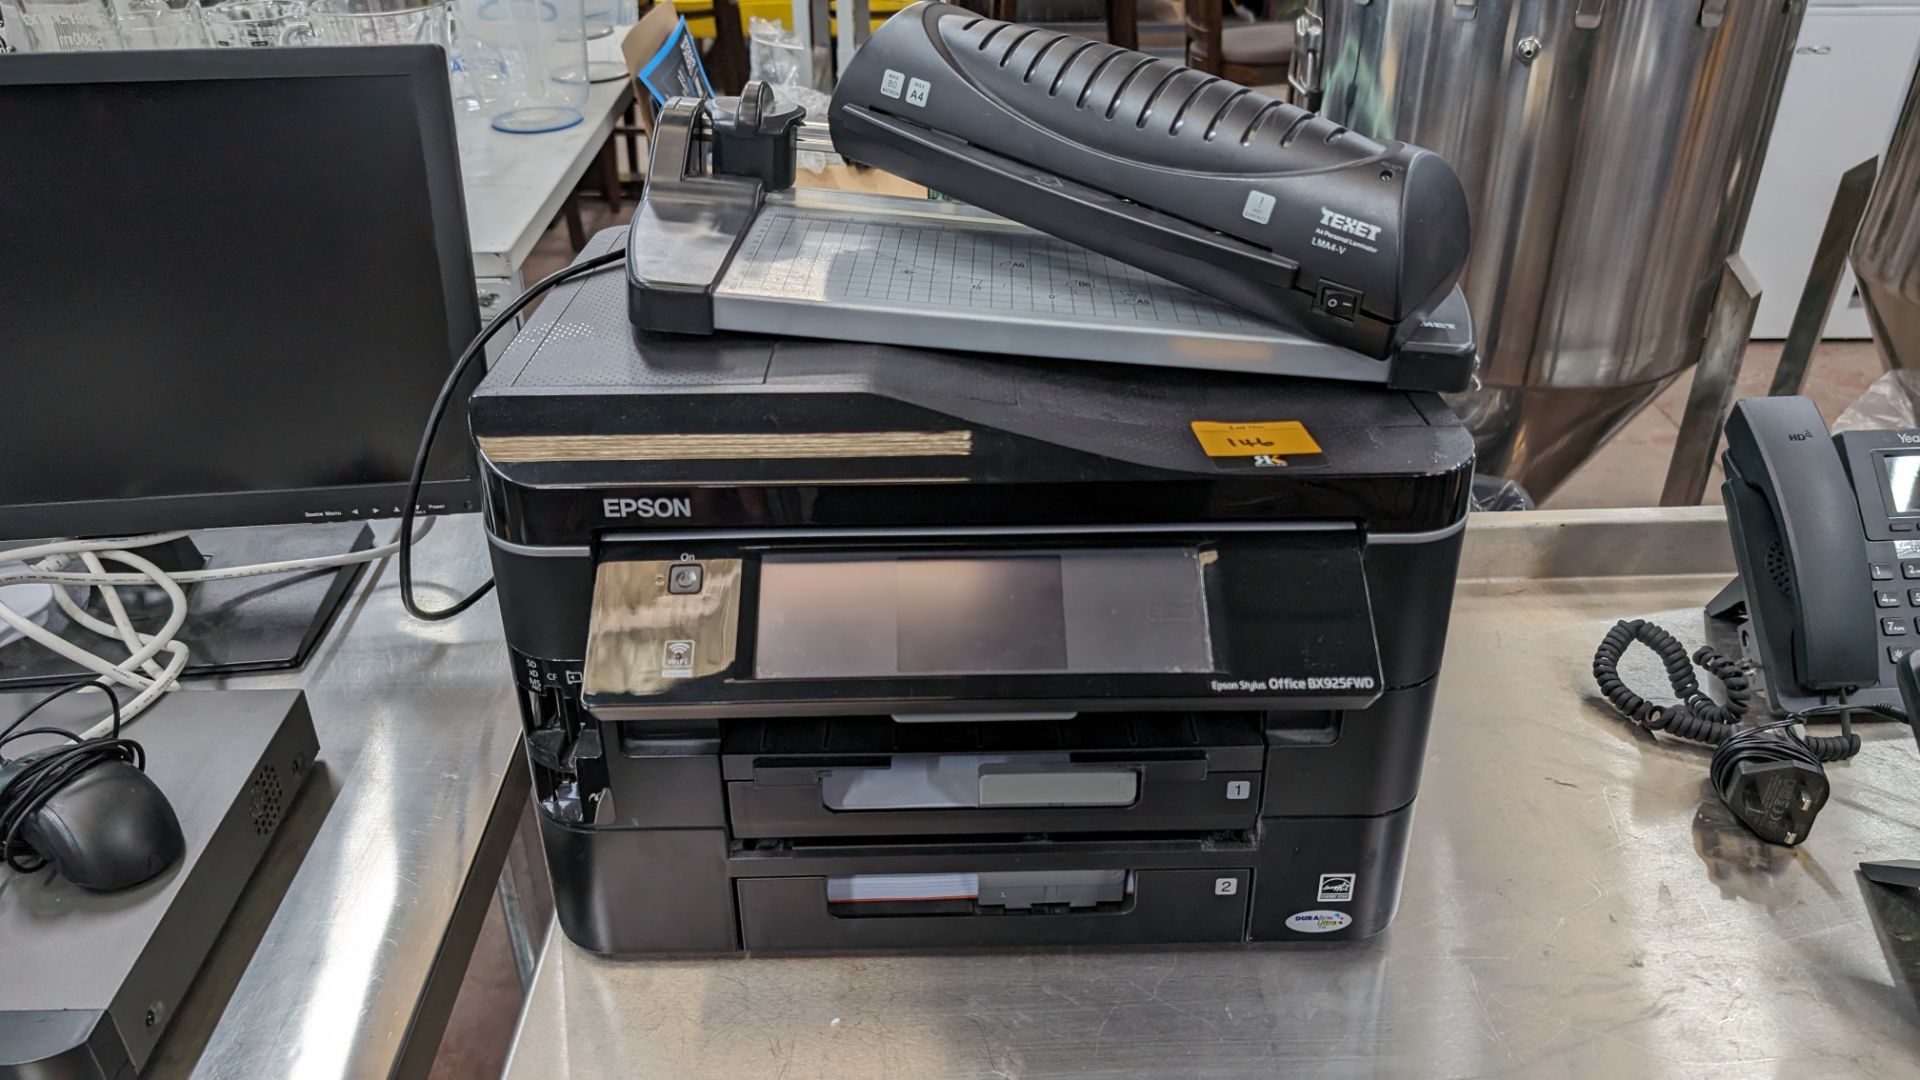 Epson Stylus Office multi-function printer, model BX925FWD, including 2 off paper cassettes, plus of - Image 2 of 6